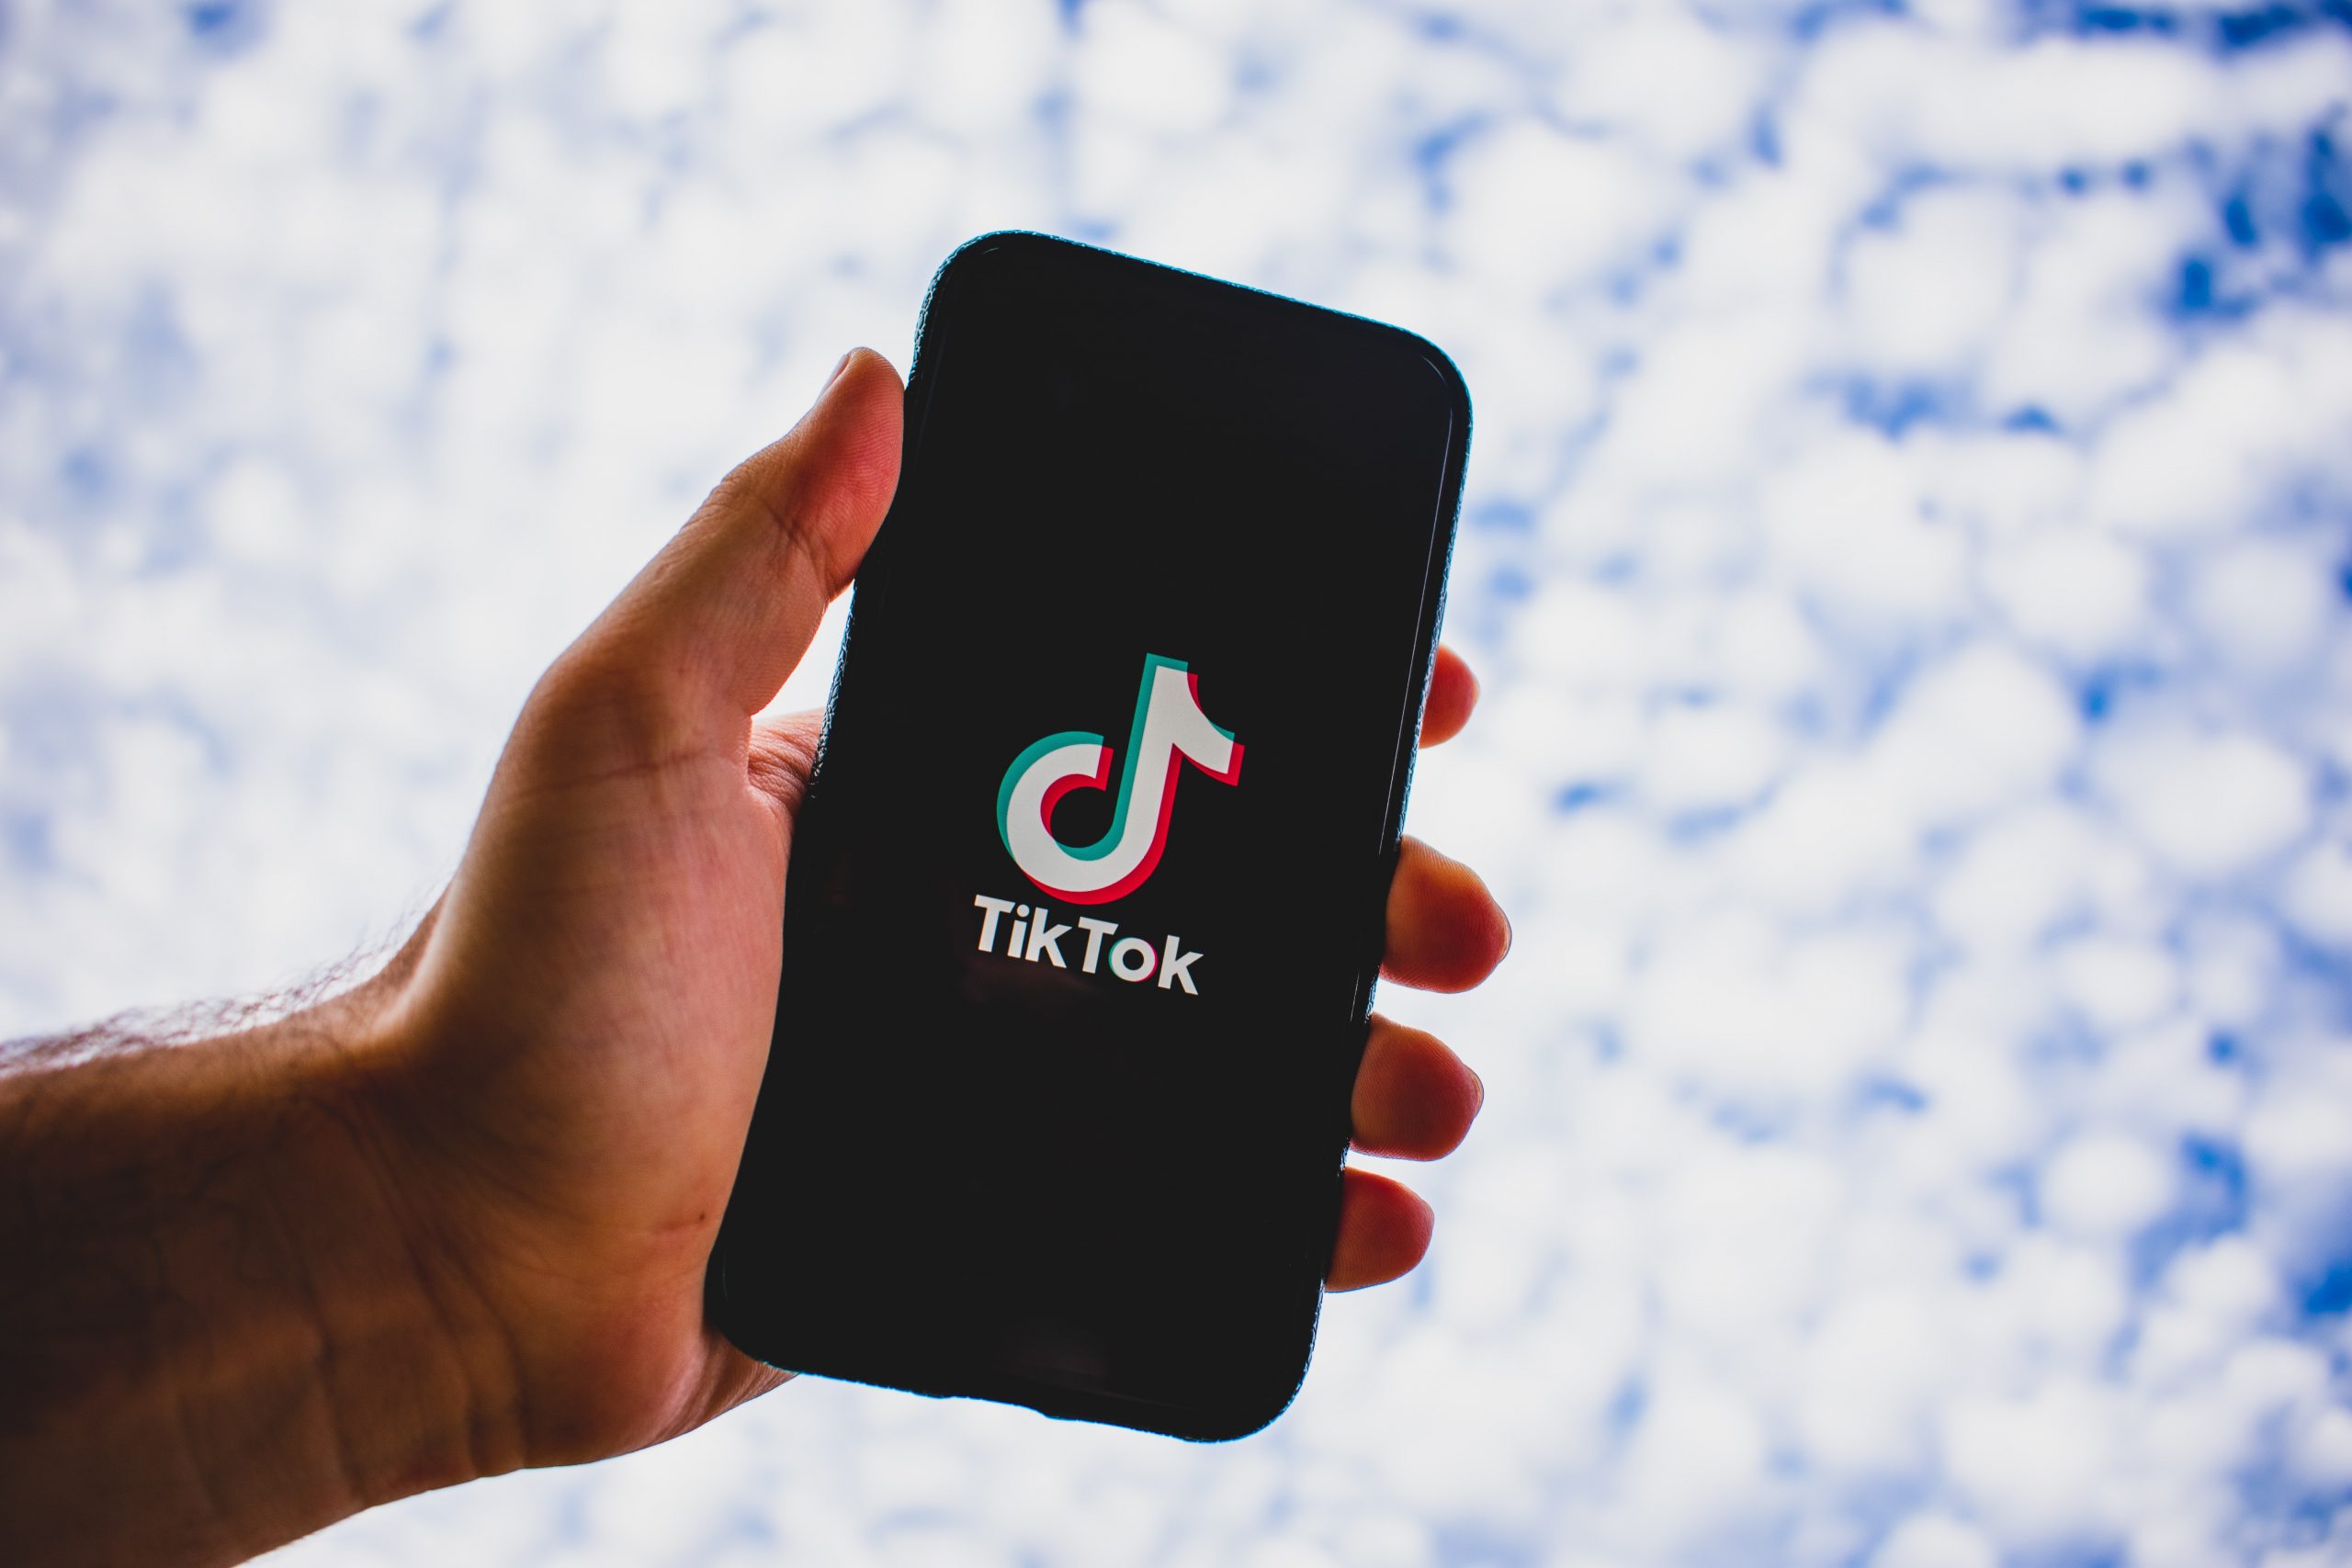 Japanese ruling party pushes for limits on TikTok